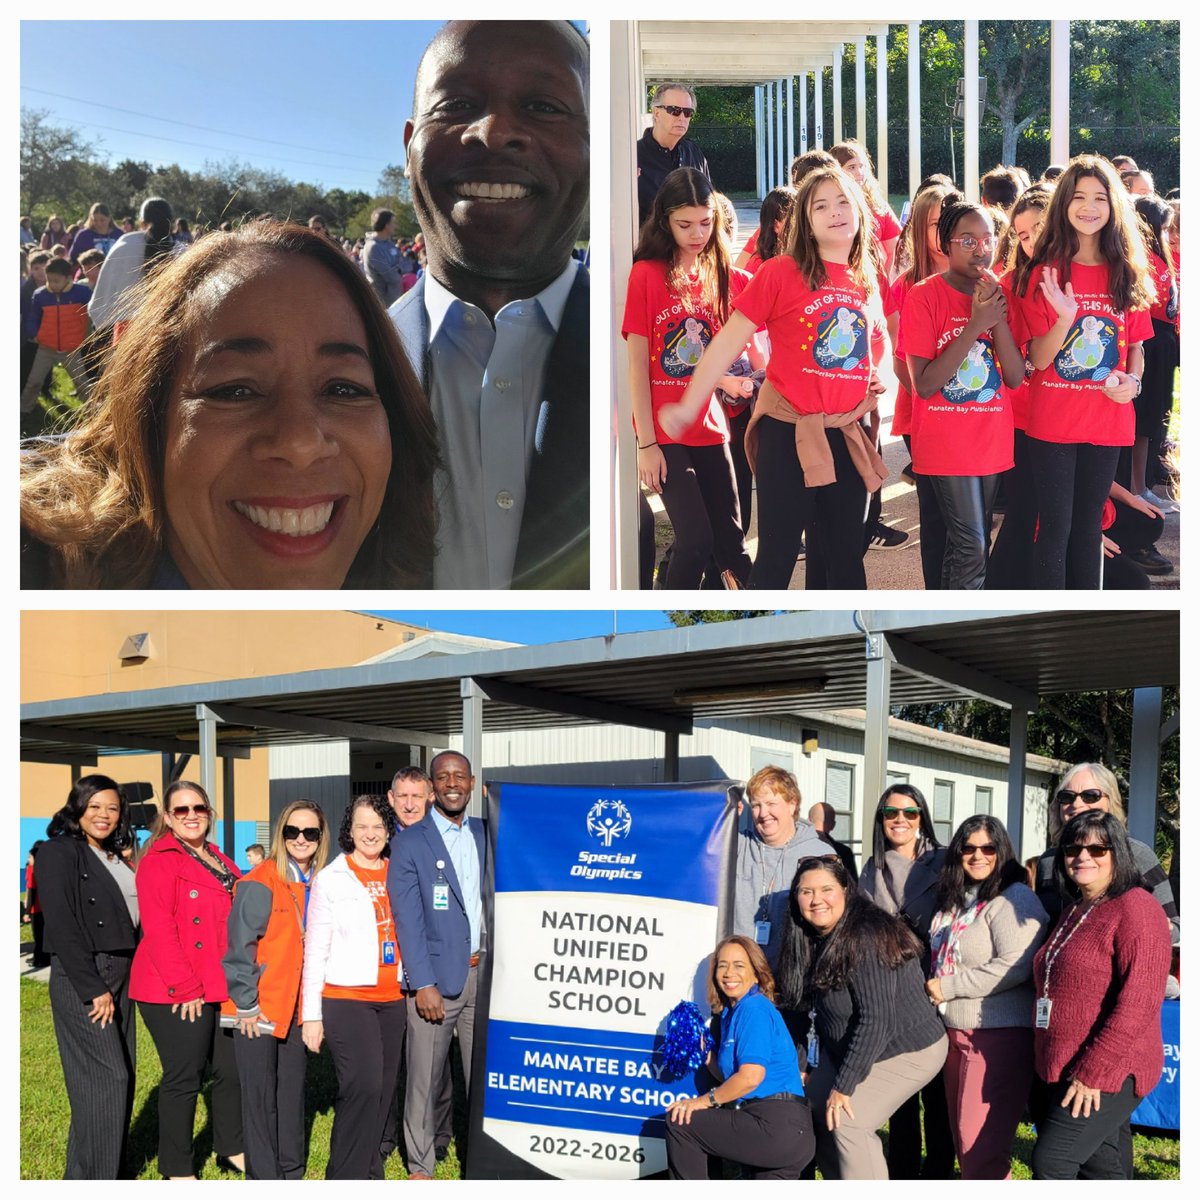 Congrats to @ManateeBayElem for being recognized as a Special Olympics National Unified Champion School. A great morning of celebrating inclusion! Well-deserved and a model for our district. #Every1Counts